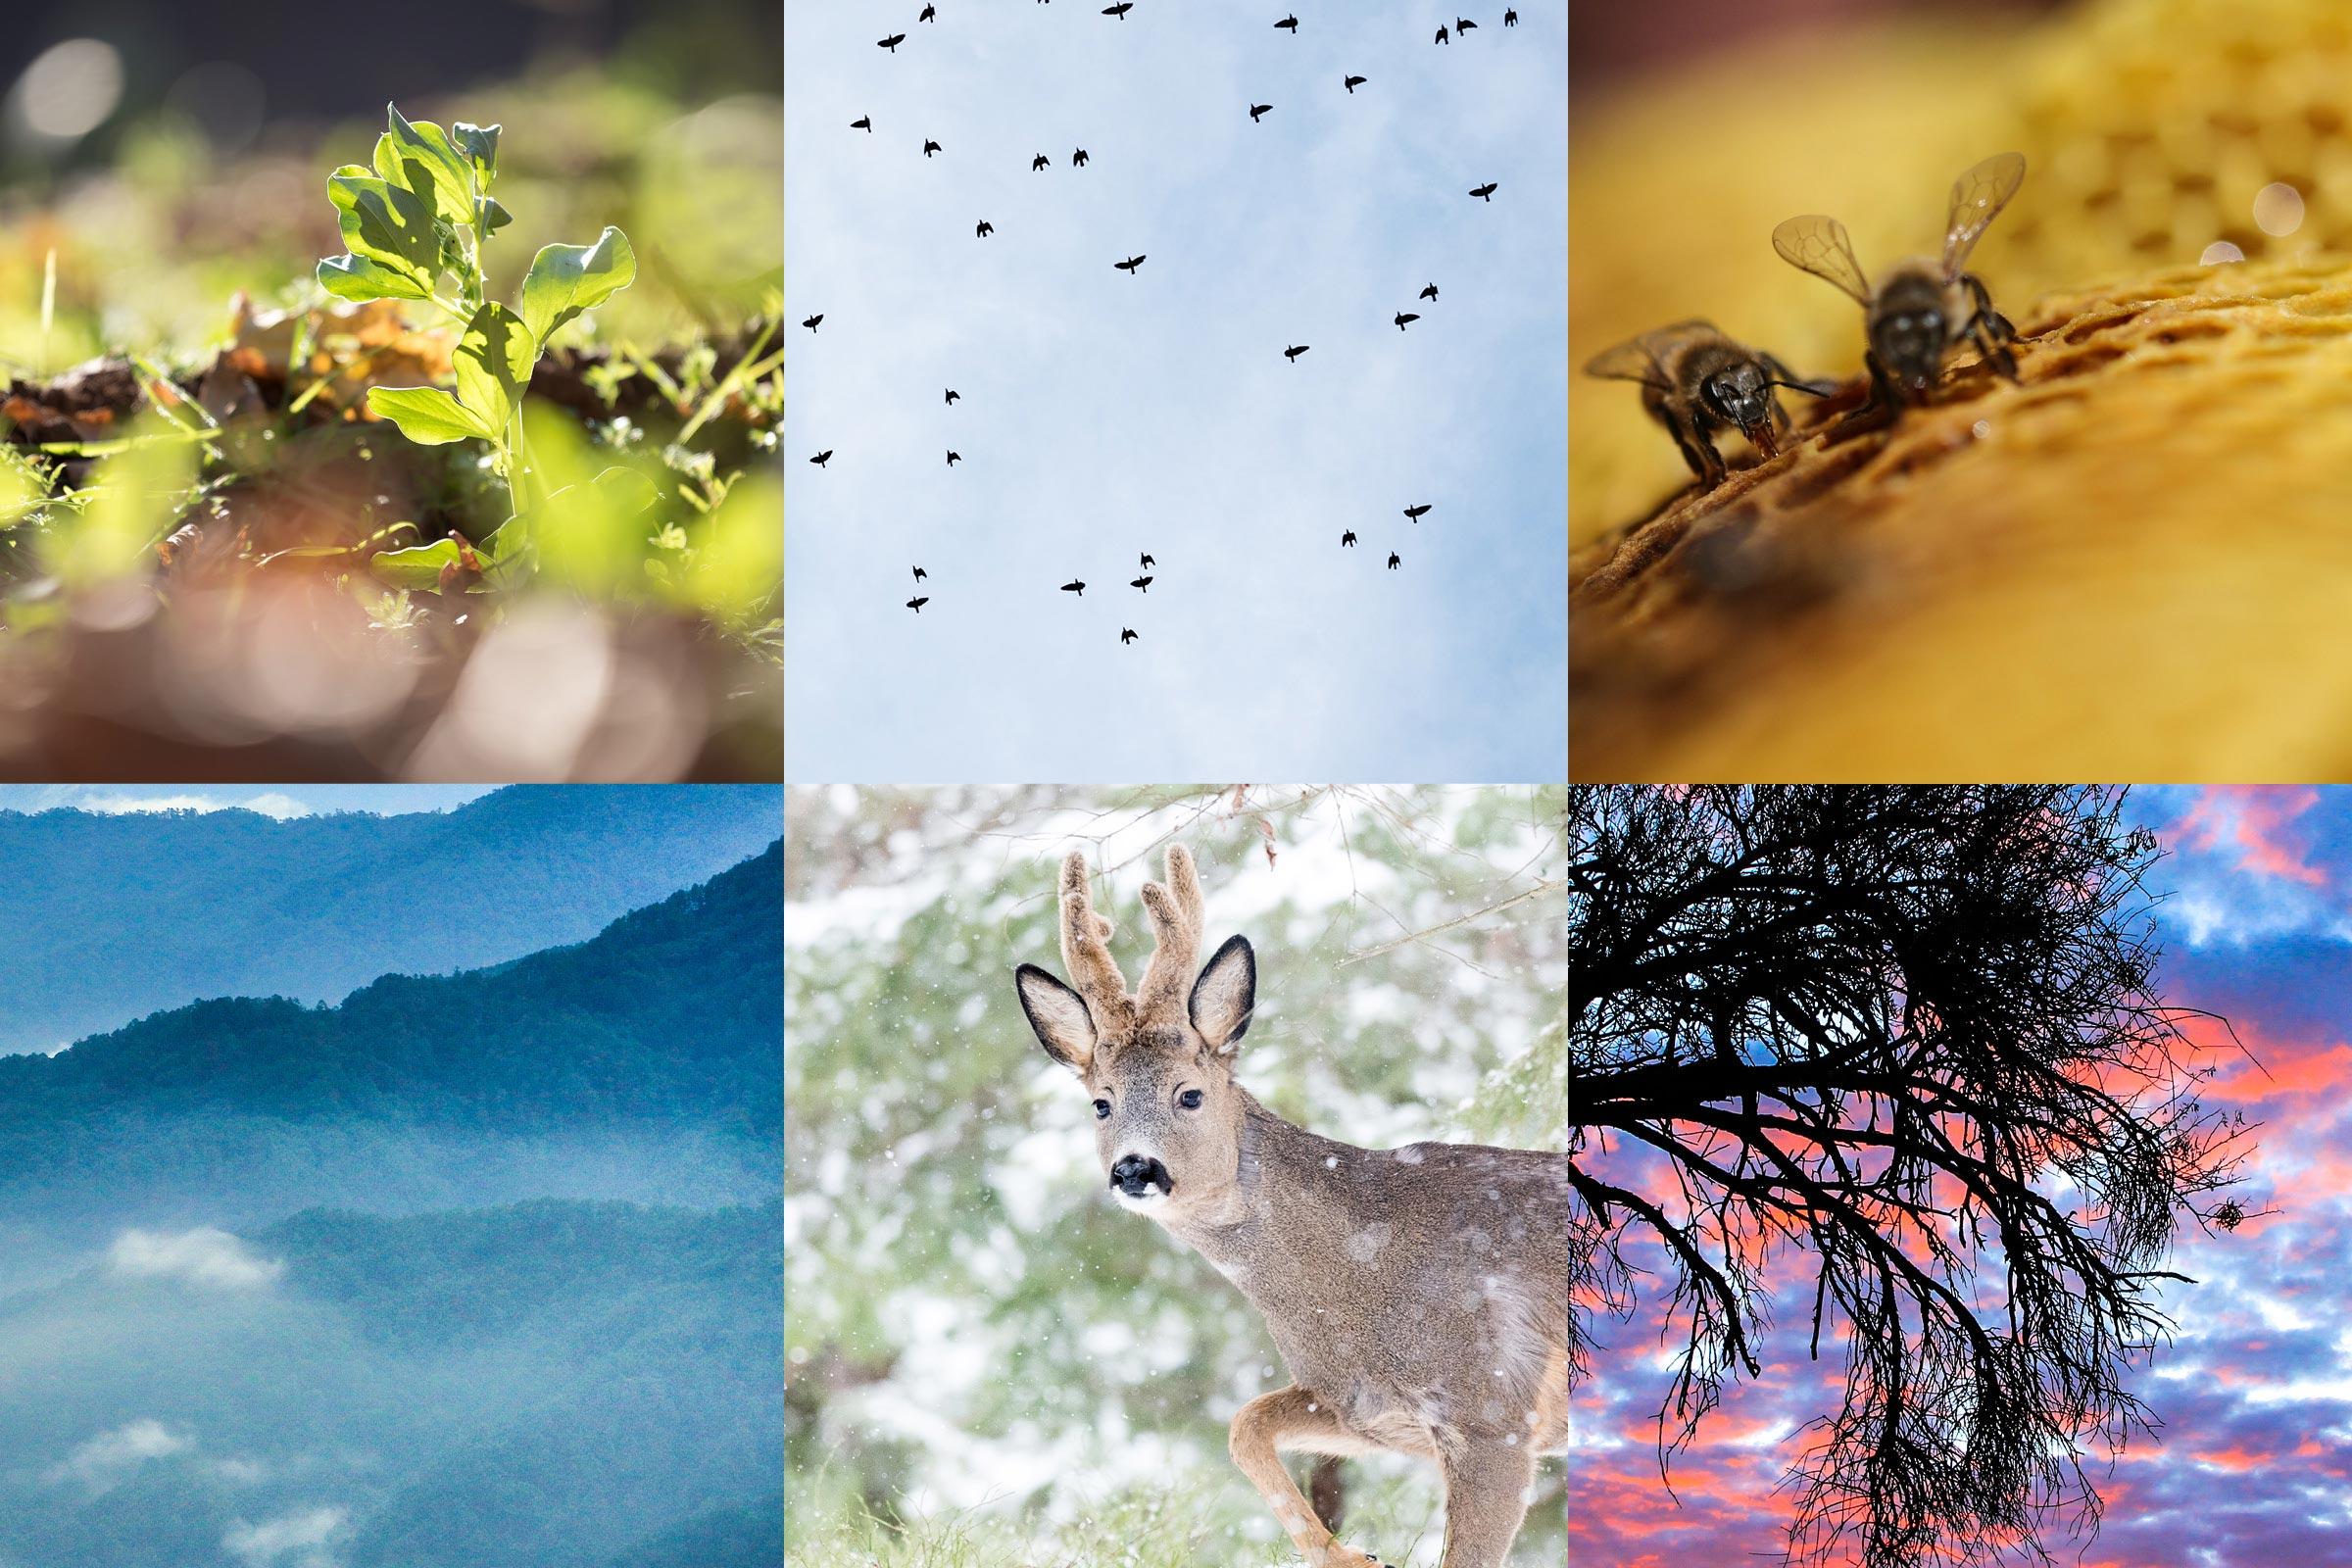 Six previews of the photos in the exhibition, depicting nature in it's diversity. Photo: LWF